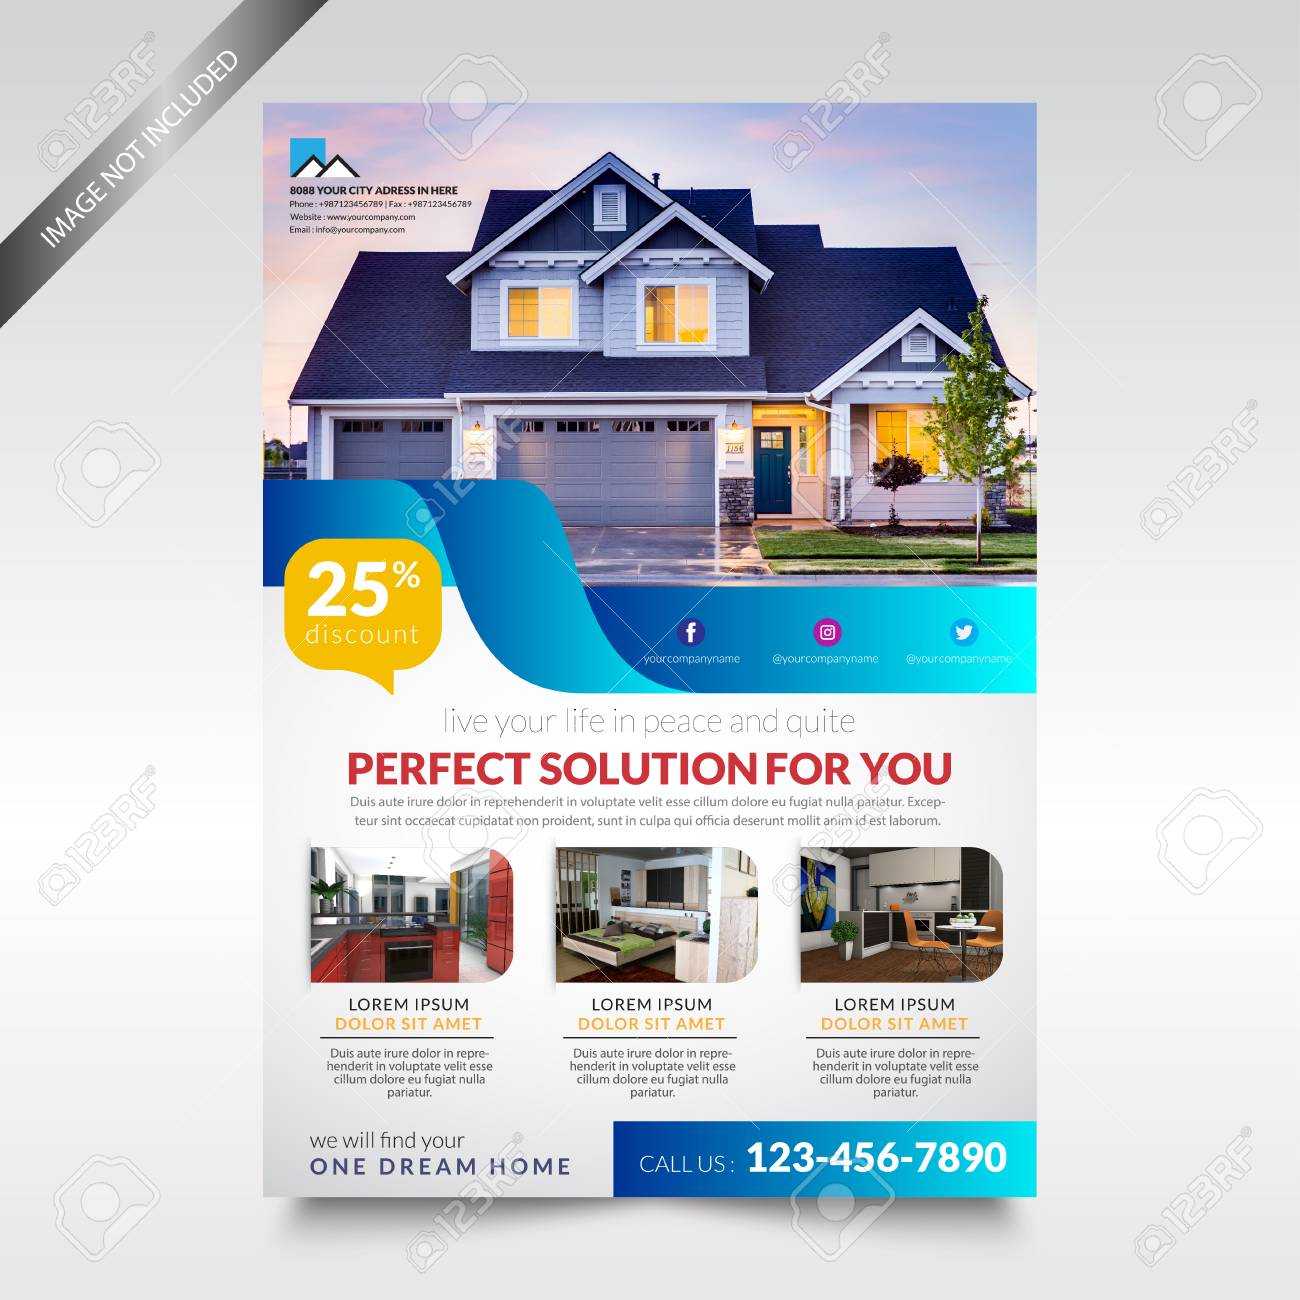 free-real-estate-flyer-template-psd-intended-for-real-estate-brochure